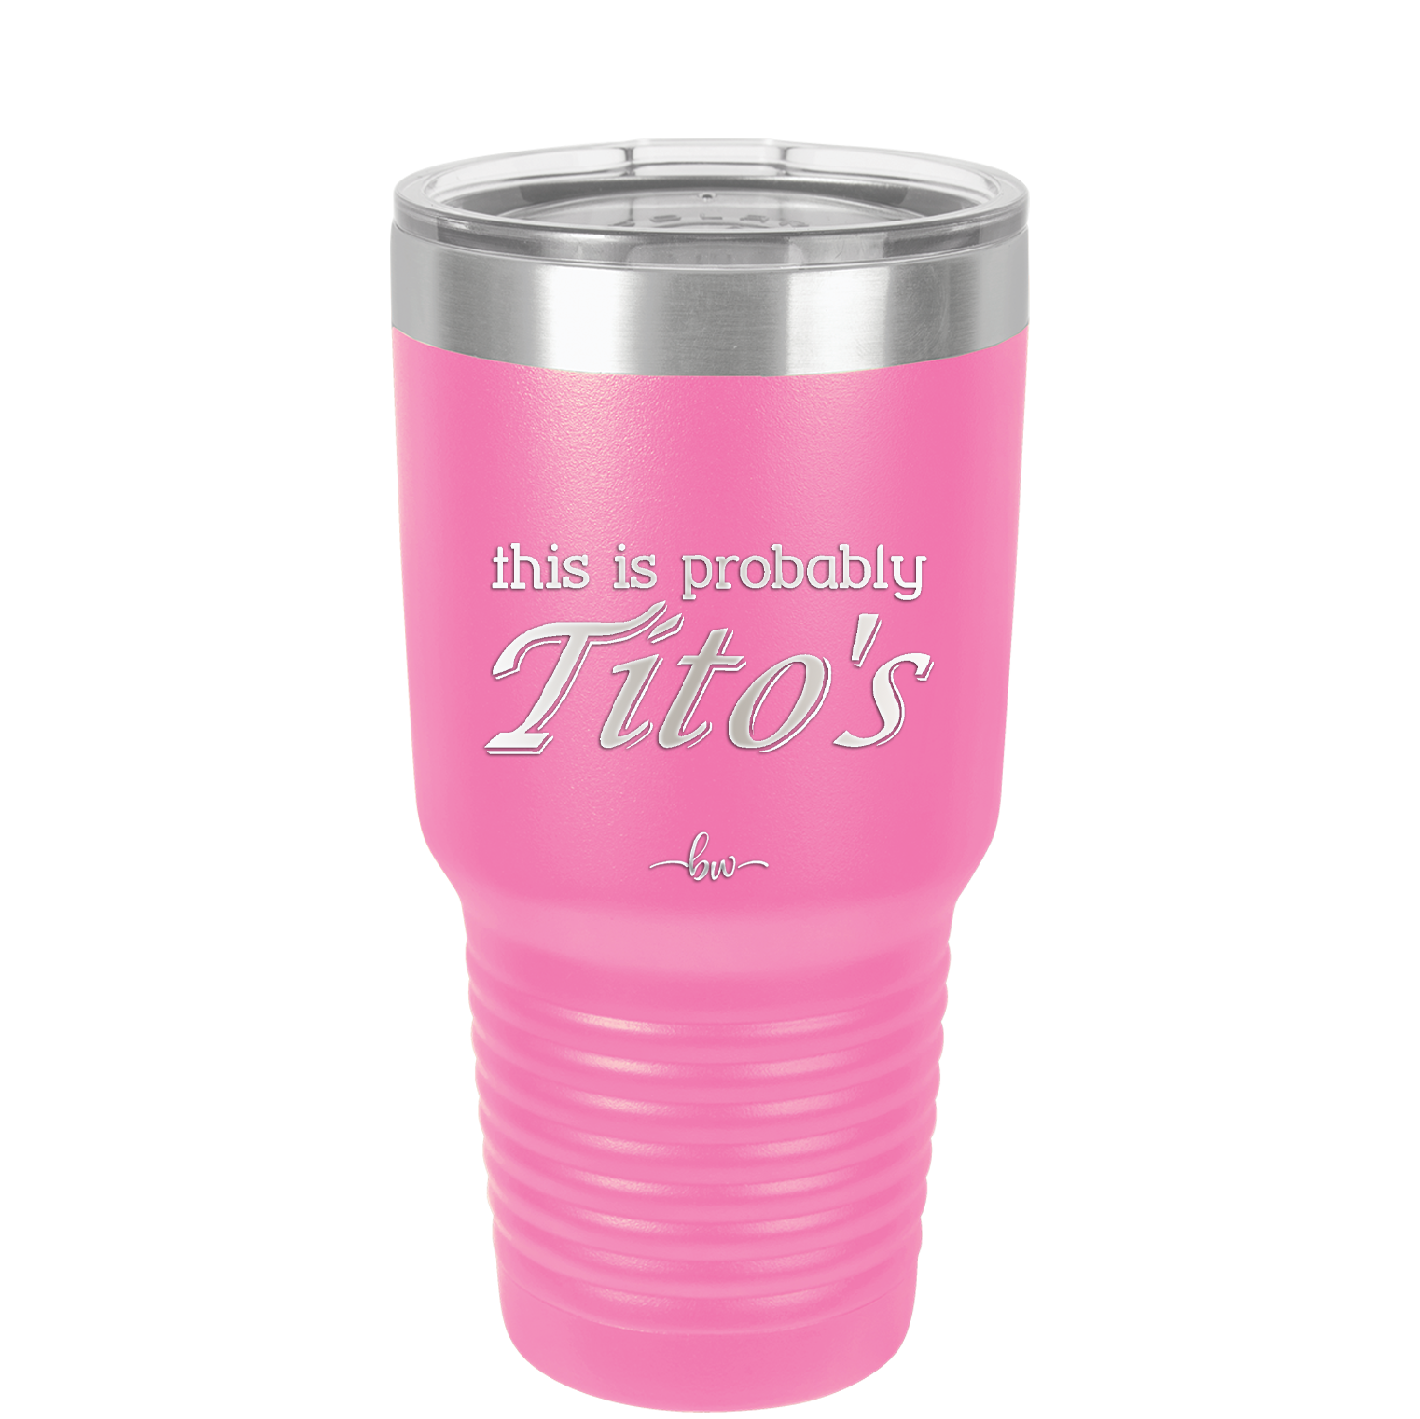 This is Probably Tito's - Laser Engraved Stainless Steel Drinkware - 1003 -